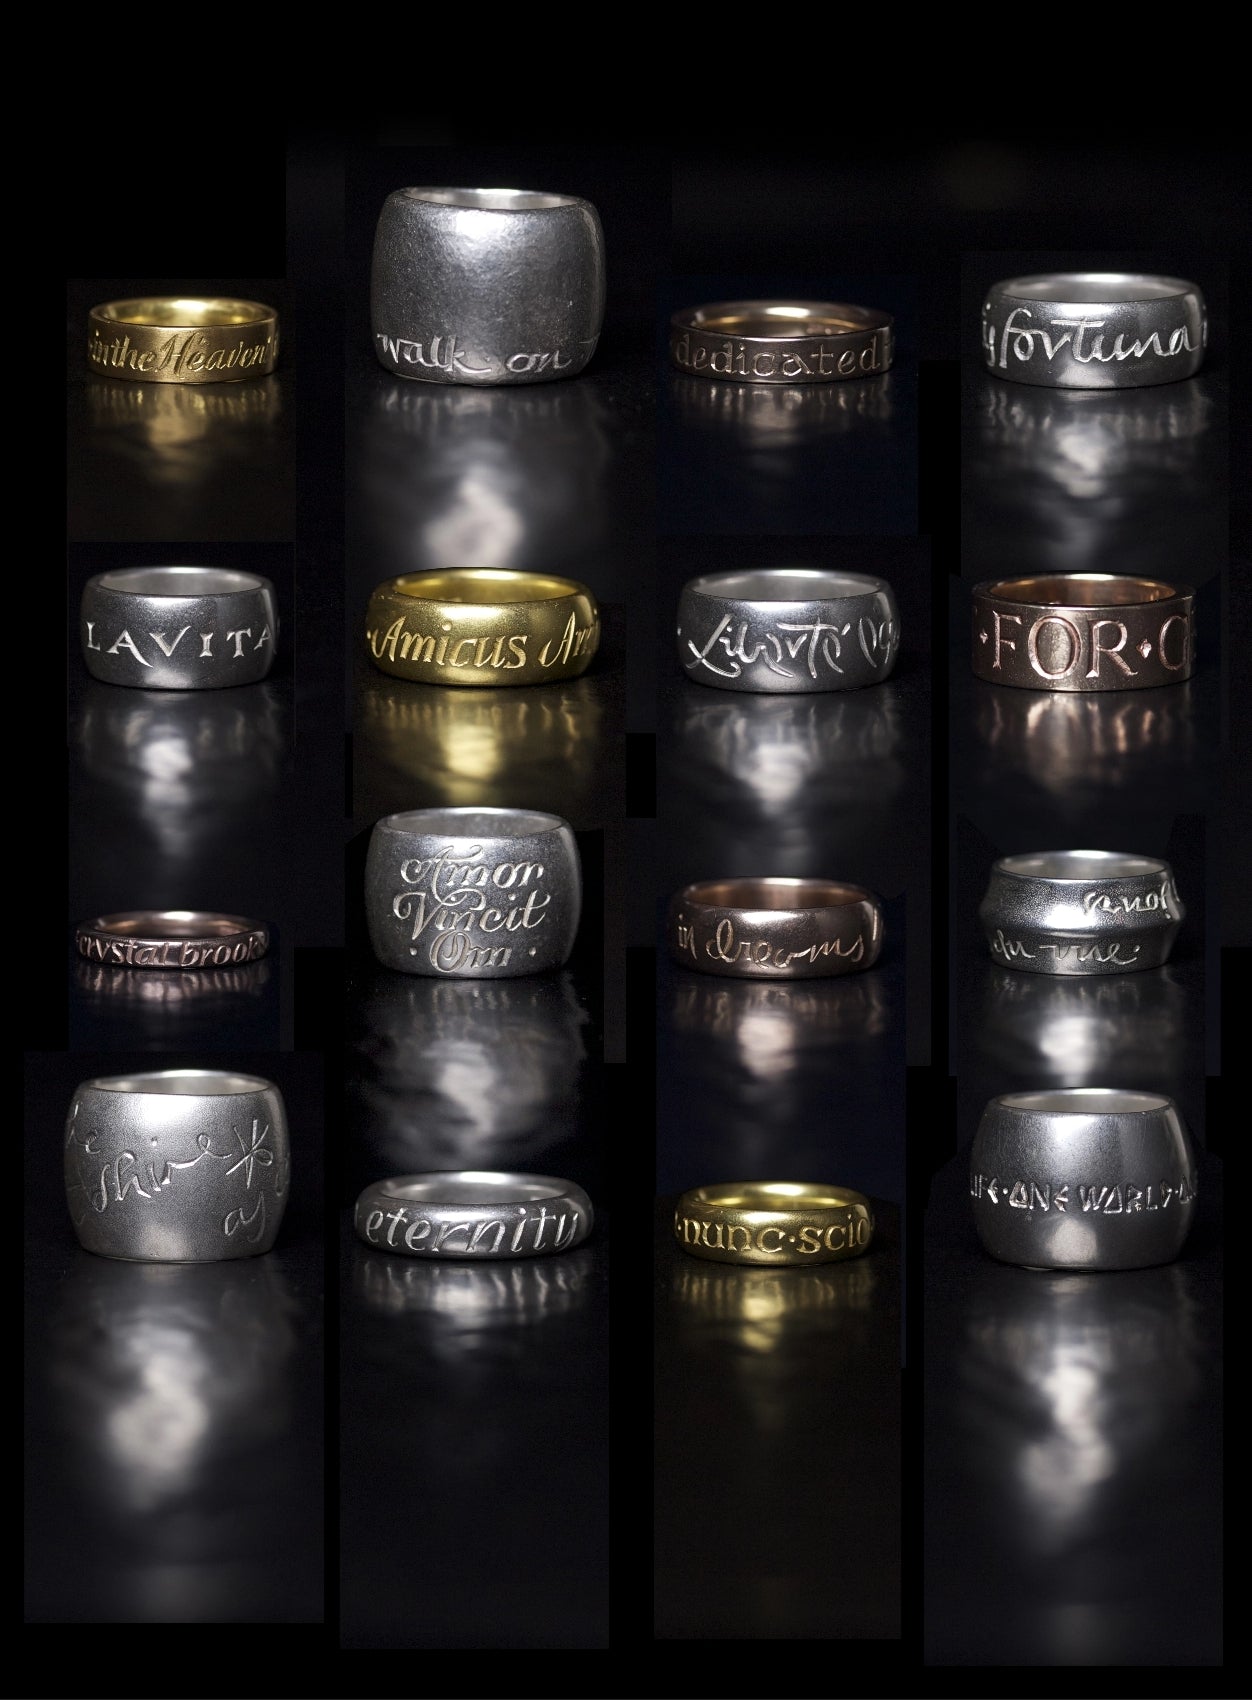 Wright & Teague inscription rings. 16 Rings, 4 rows of 4. Reflecting on a high polished black surface.